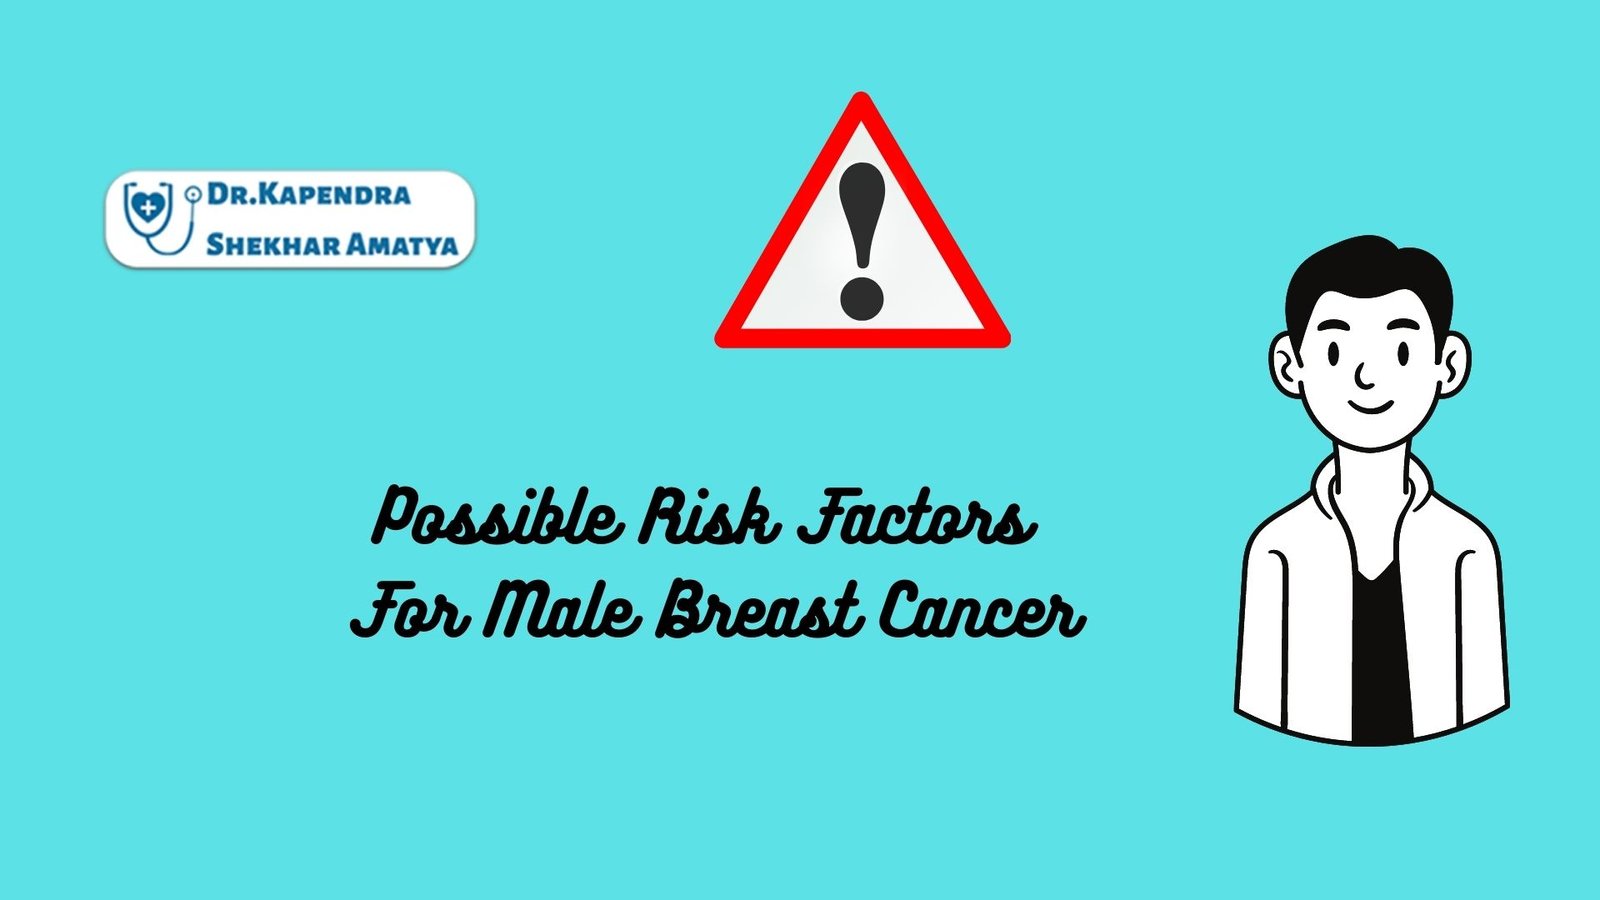 Possible Risk Factors For Male Breast Cancer